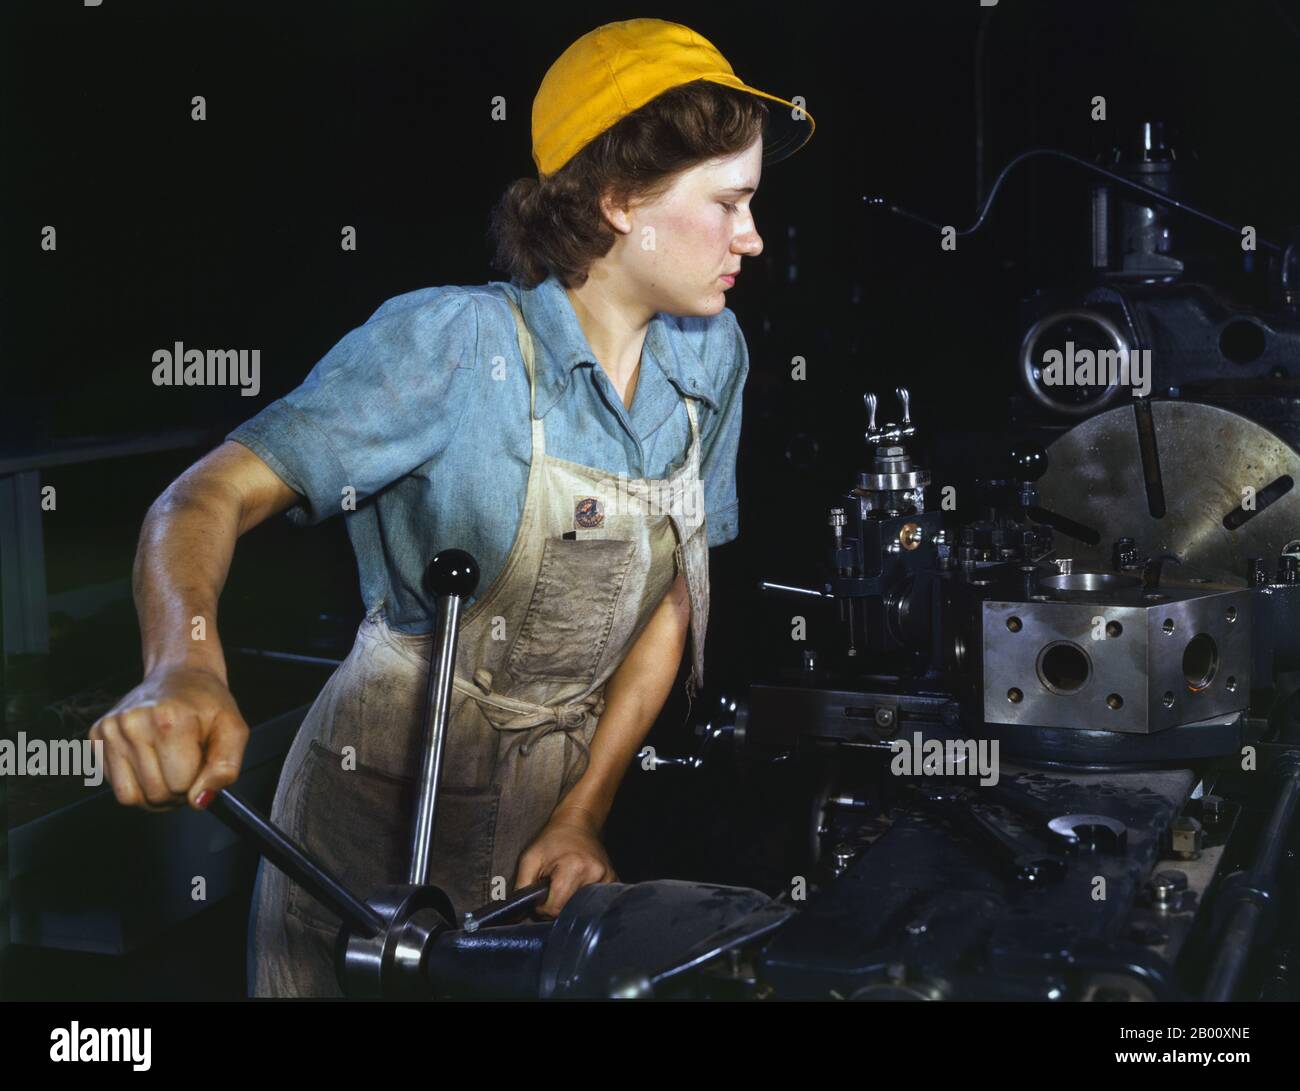 USA: A real life 'Rosie the Riveter' - Turret lathe operator machining parts for transport planes at the Consolidated Aircraft Corporation plant, Fort Worth, Texas. Photo by Howard R. Hollem (-1949), 1942.  'Rosie the Riveter' is a cultural icon of the United States representing the American women who worked in factories during World War II; many worked in manufacturing plants that produced munitions and war supplies. These women sometimes took entirely new jobs replacing the male workers who were in the military. The character is considered a feminist icon in the US and elsewhere. Stock Photo